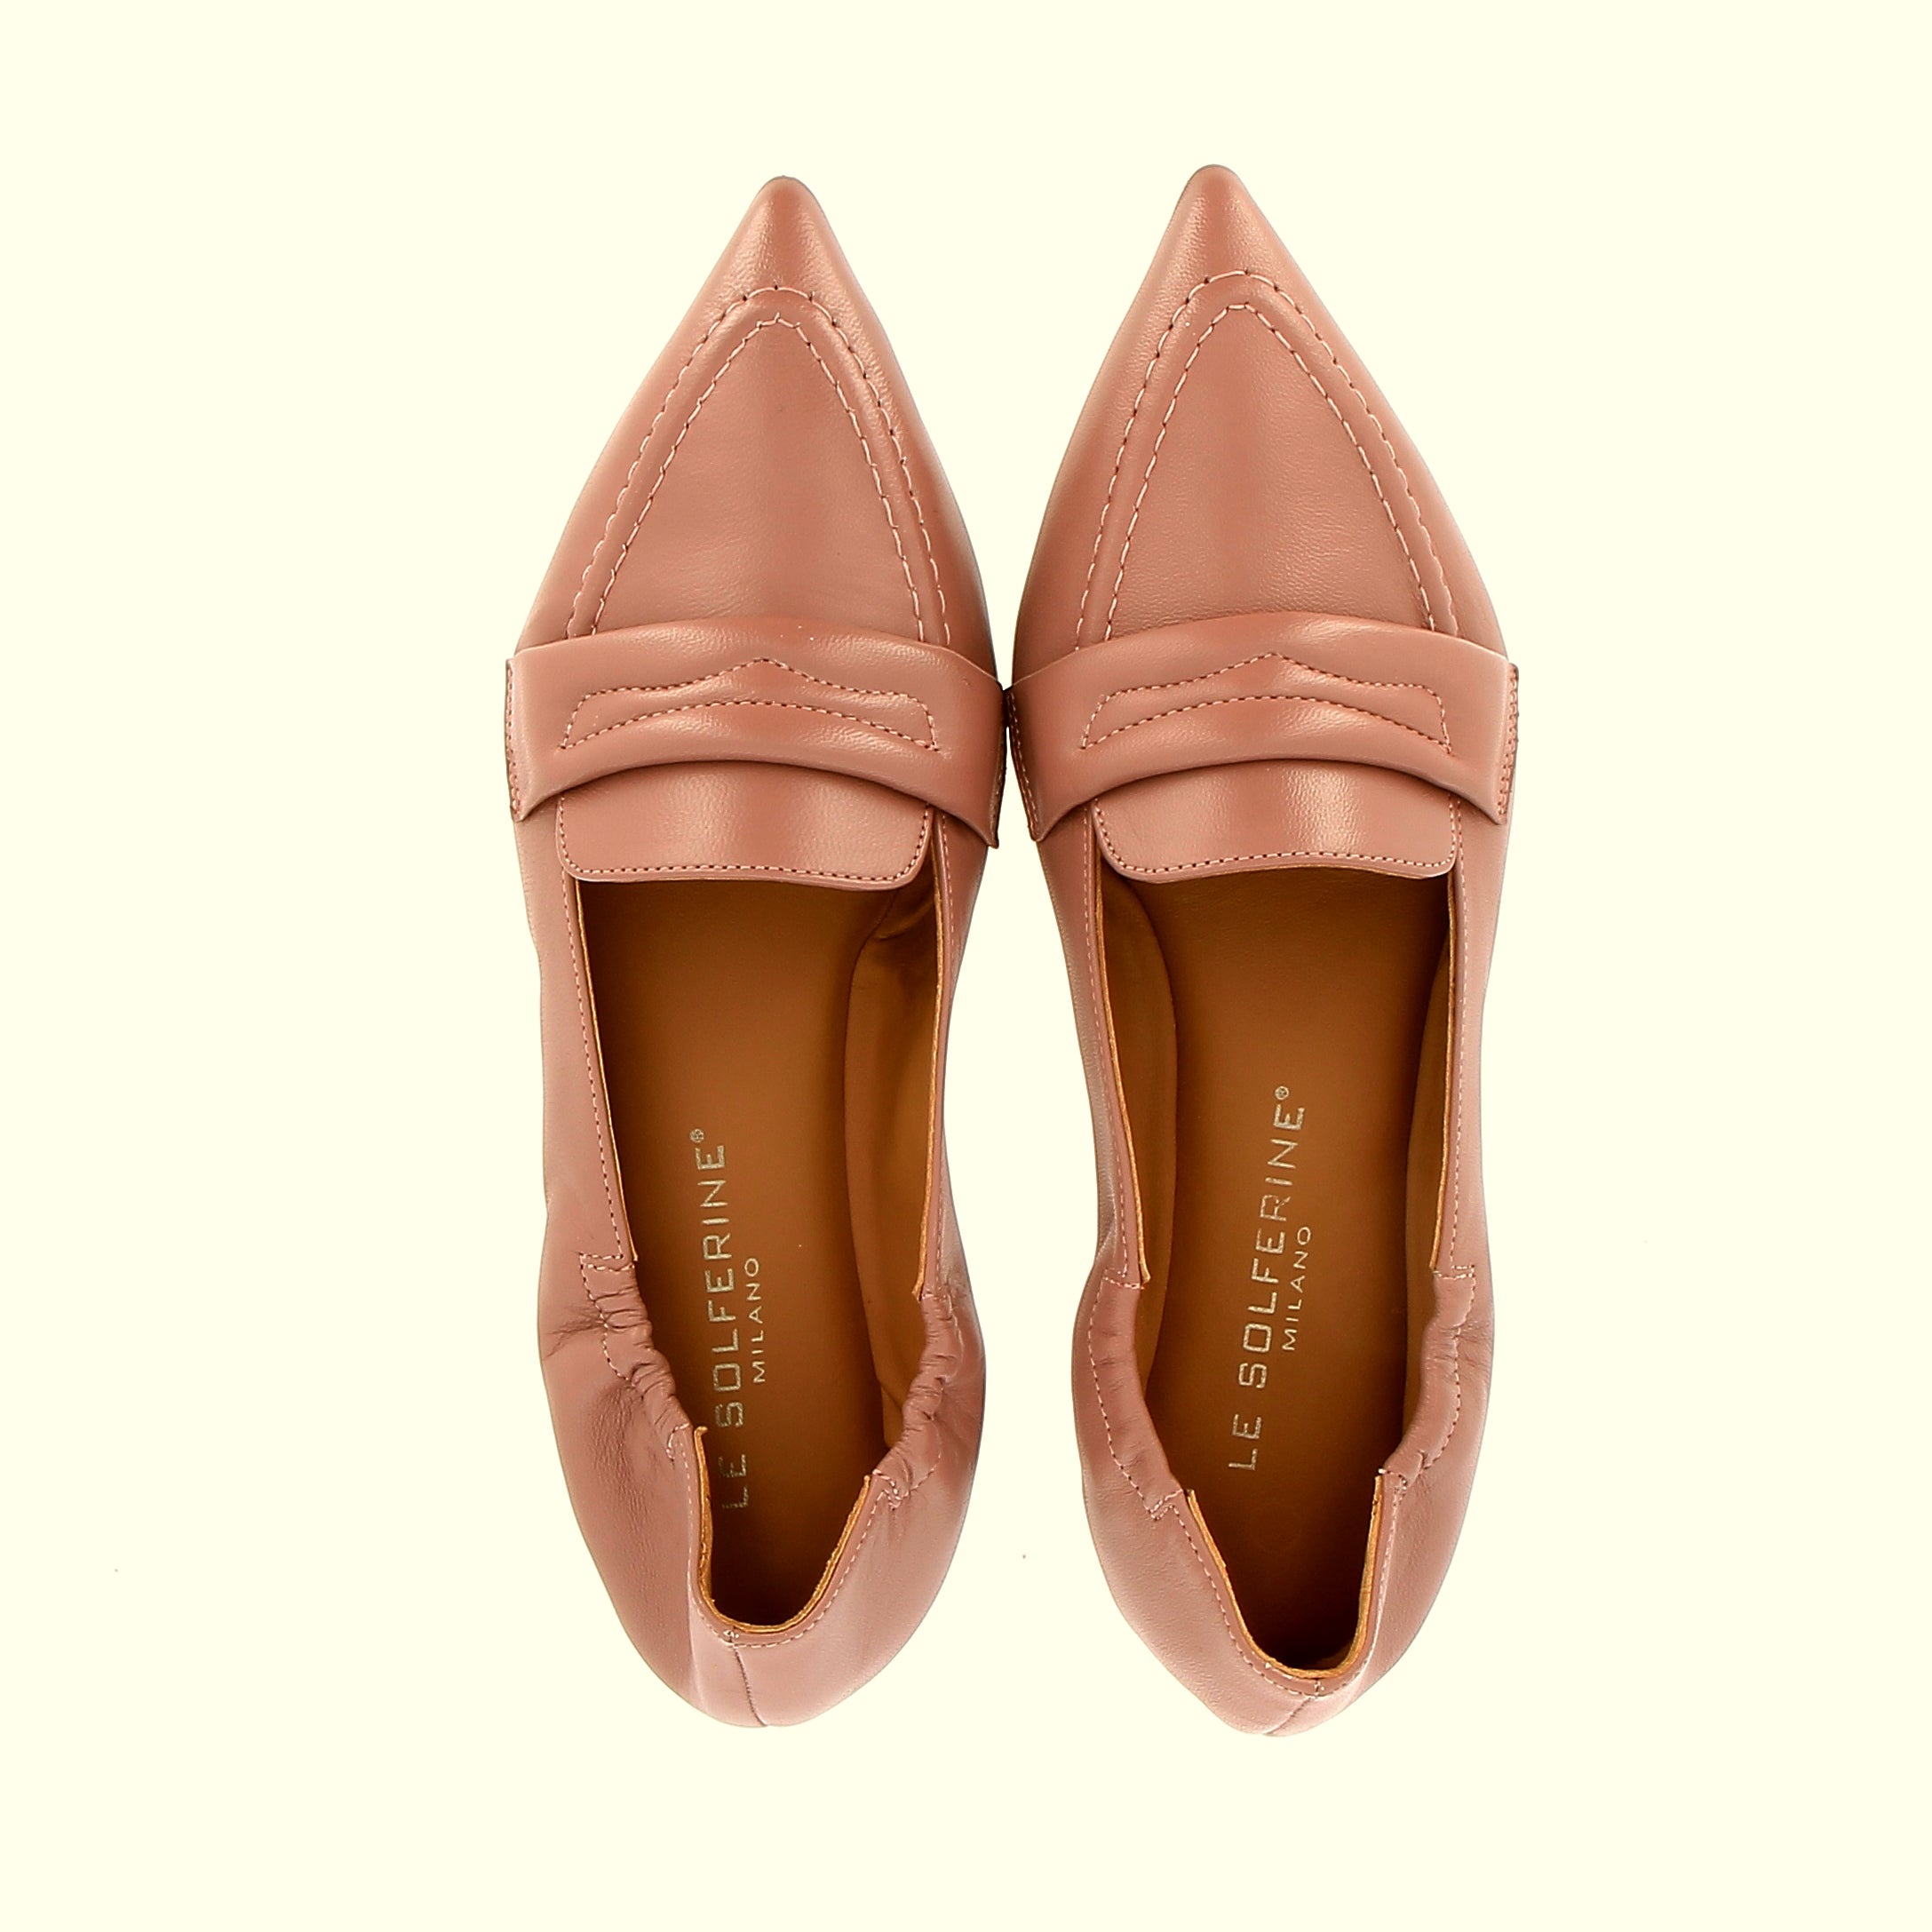 Loafer in powder-colored supersoft nappa leather